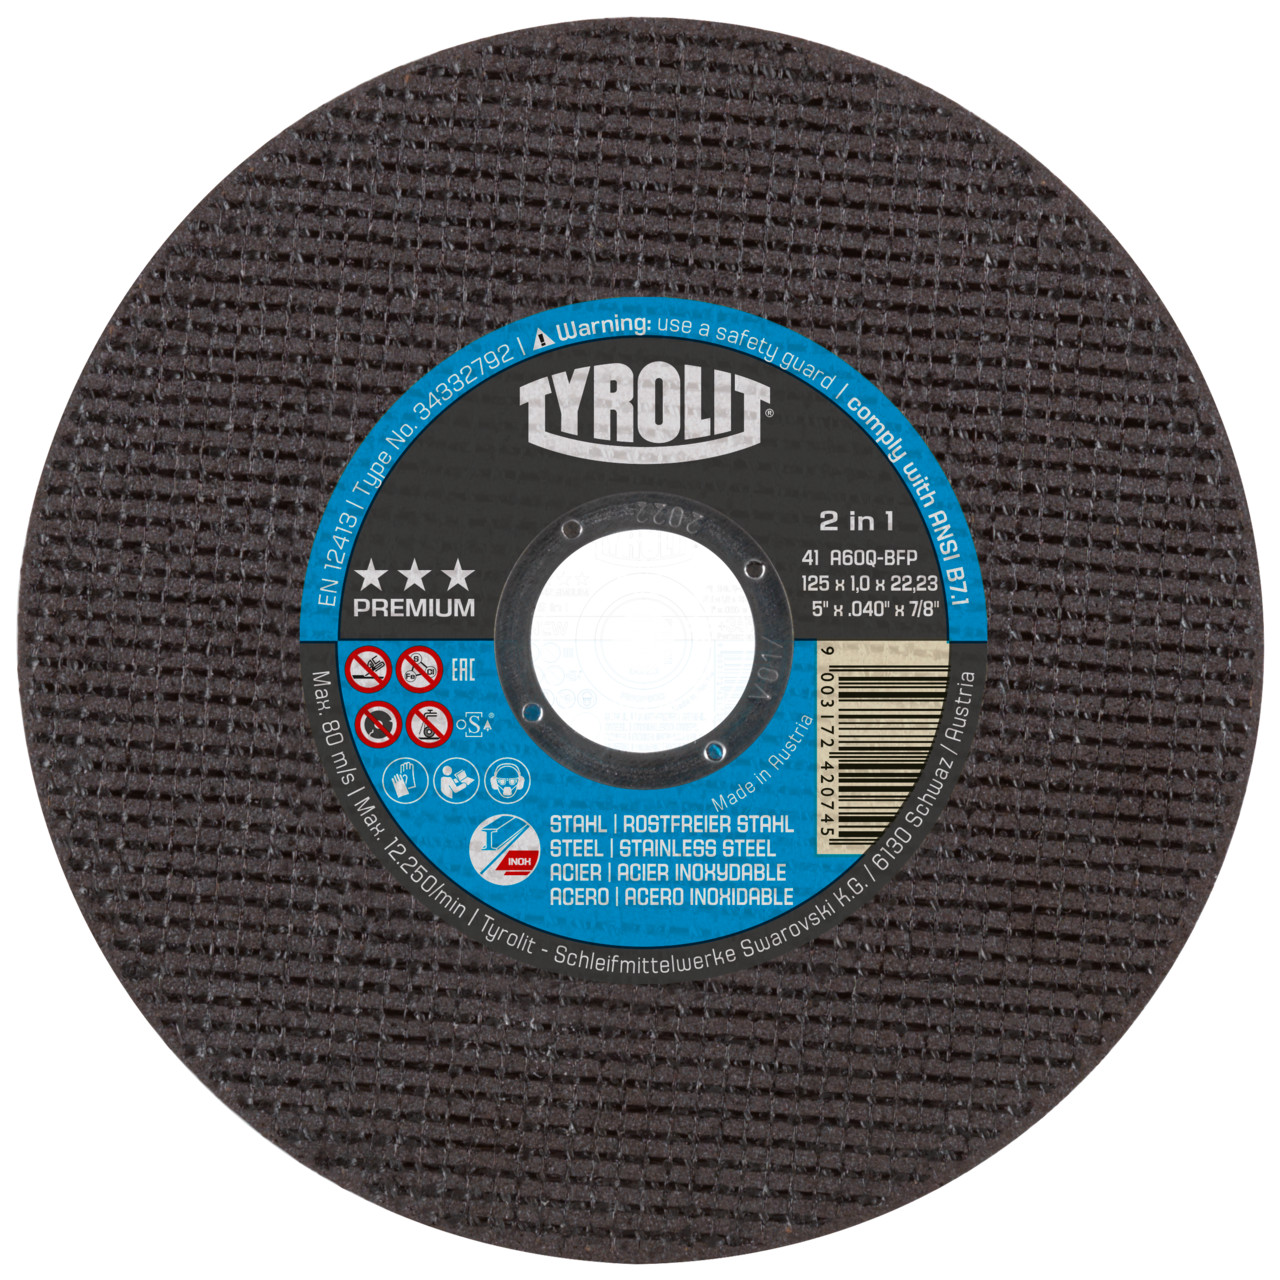 TYROLIT cut-off wheels DxDxH 178x3.0x22.23 2in1 for steel and stainless steel, shape: 41 - straight version, Art. 872342